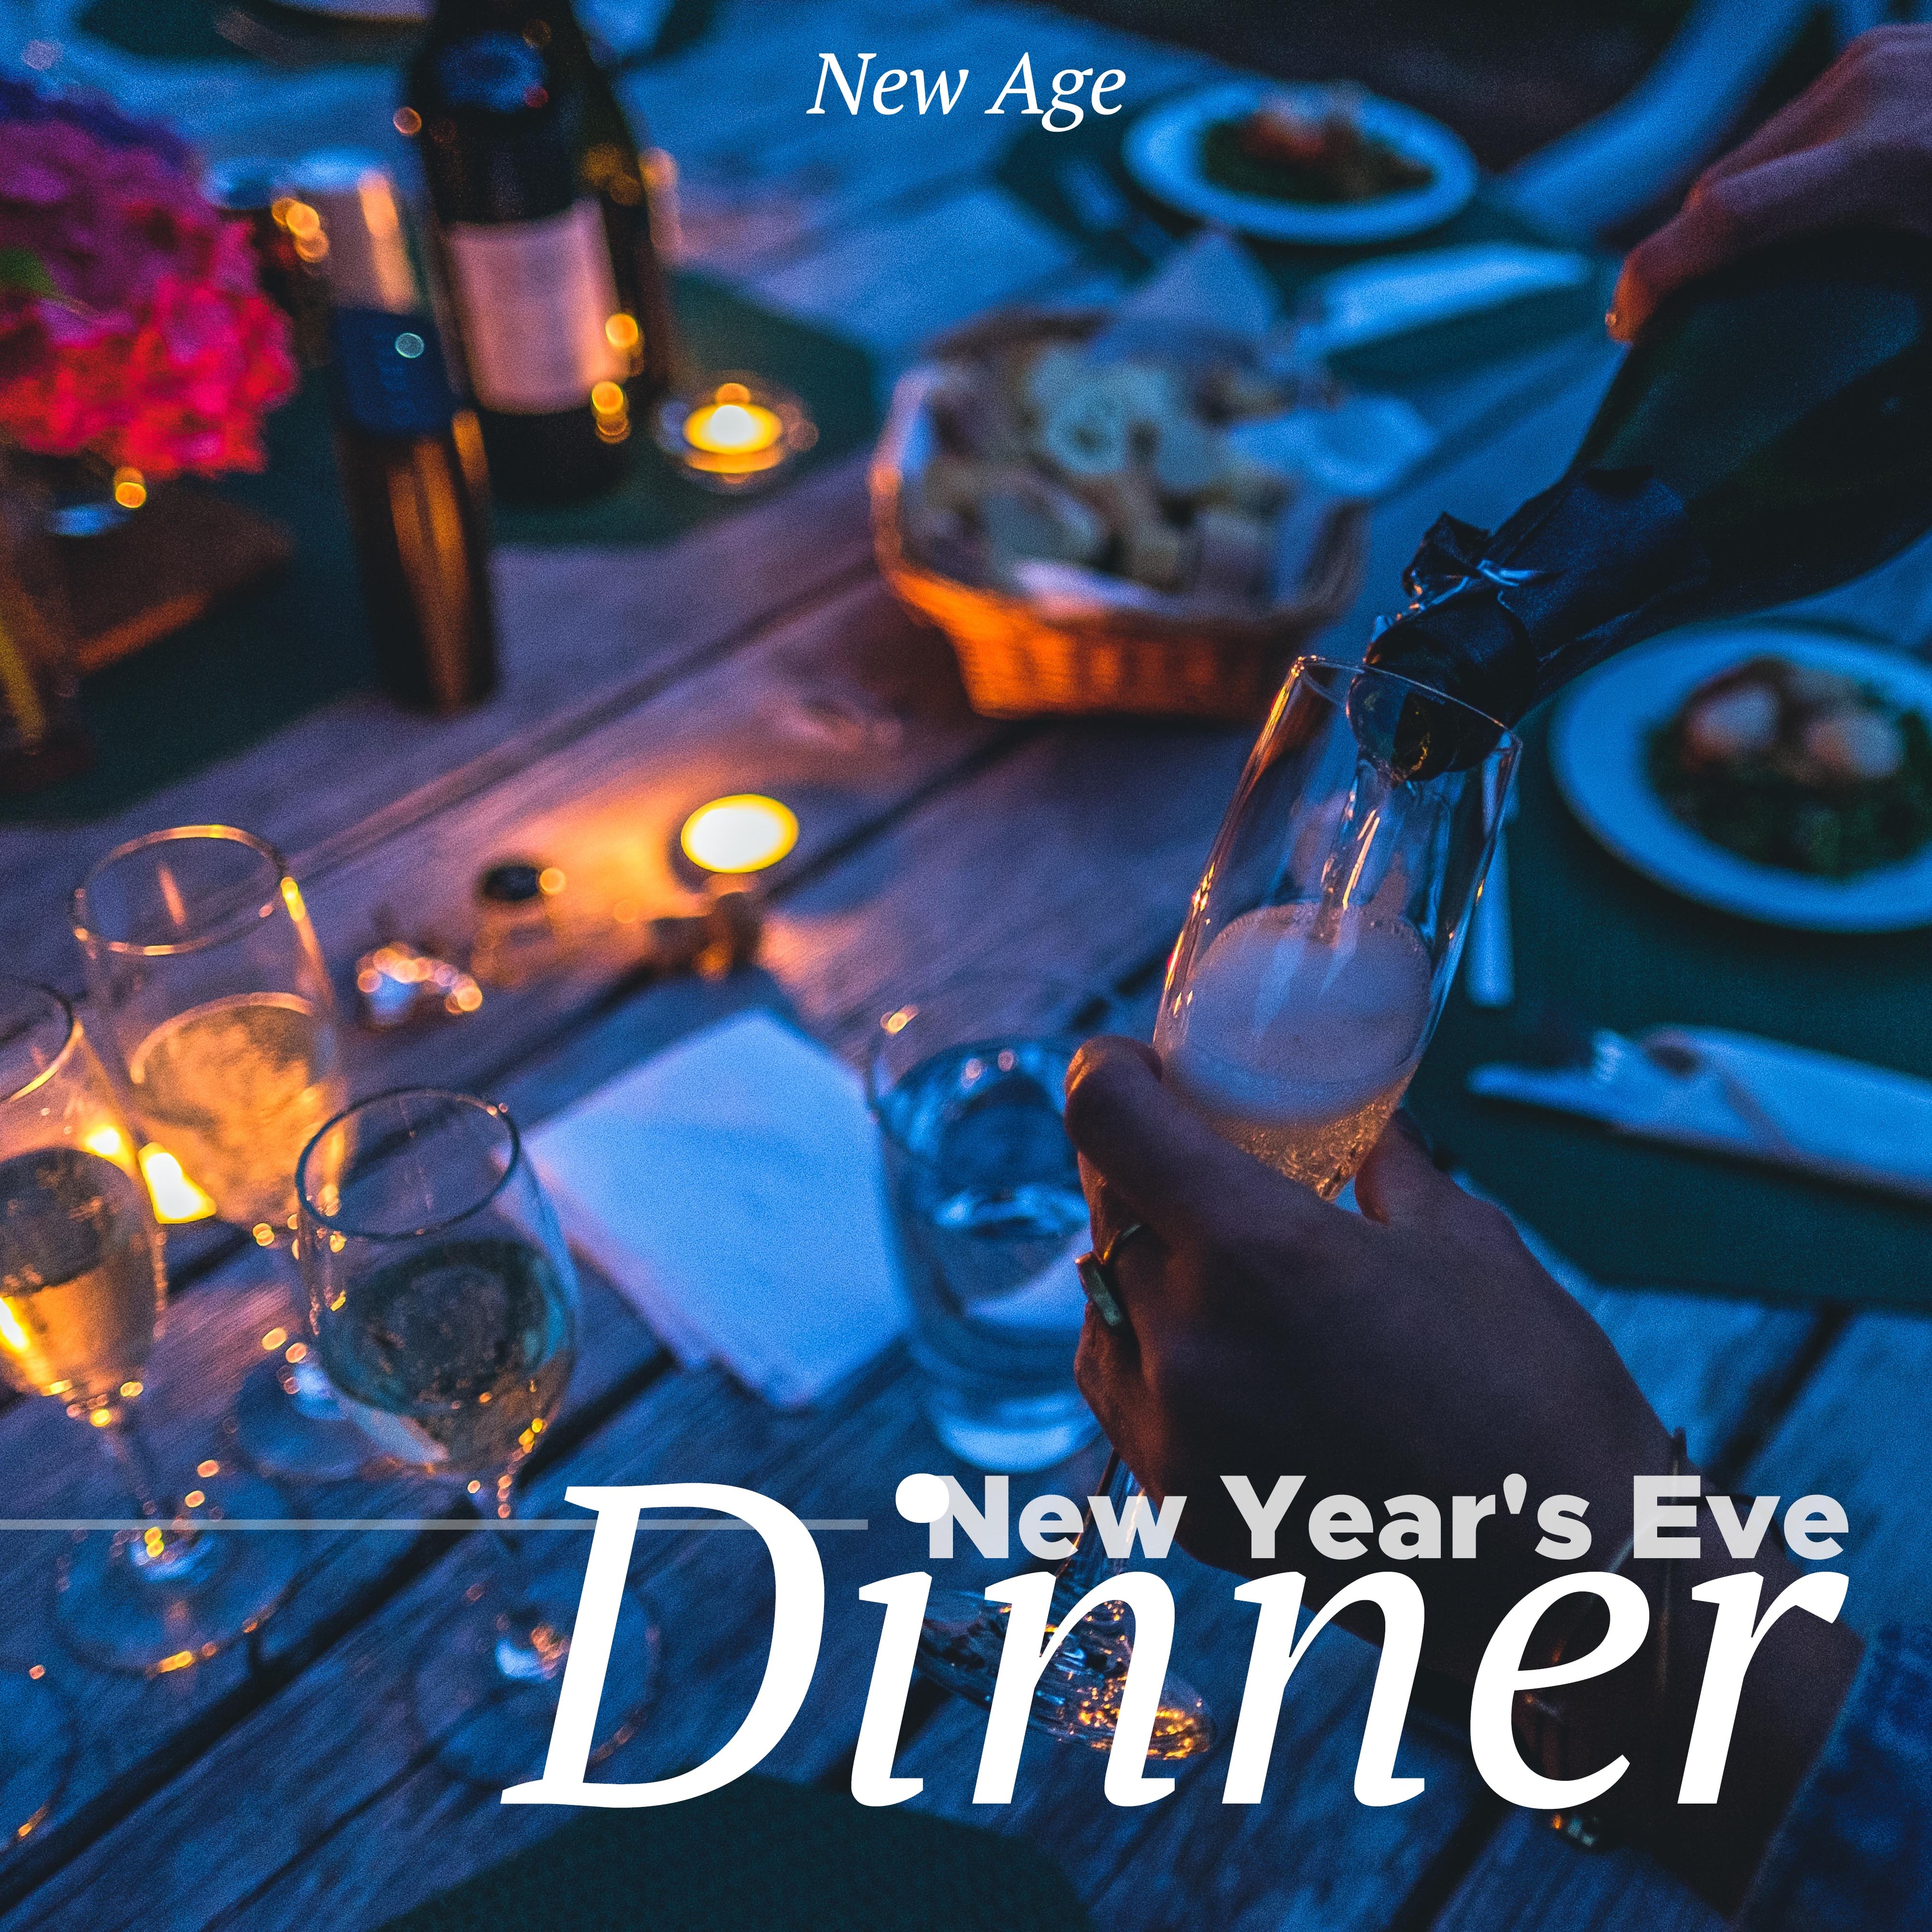 New Year's Eve Dinner: Gentle, Soothing and Relaxing Background Music to Set a Relaxed Atmosphere for your New Year's Eve dinner